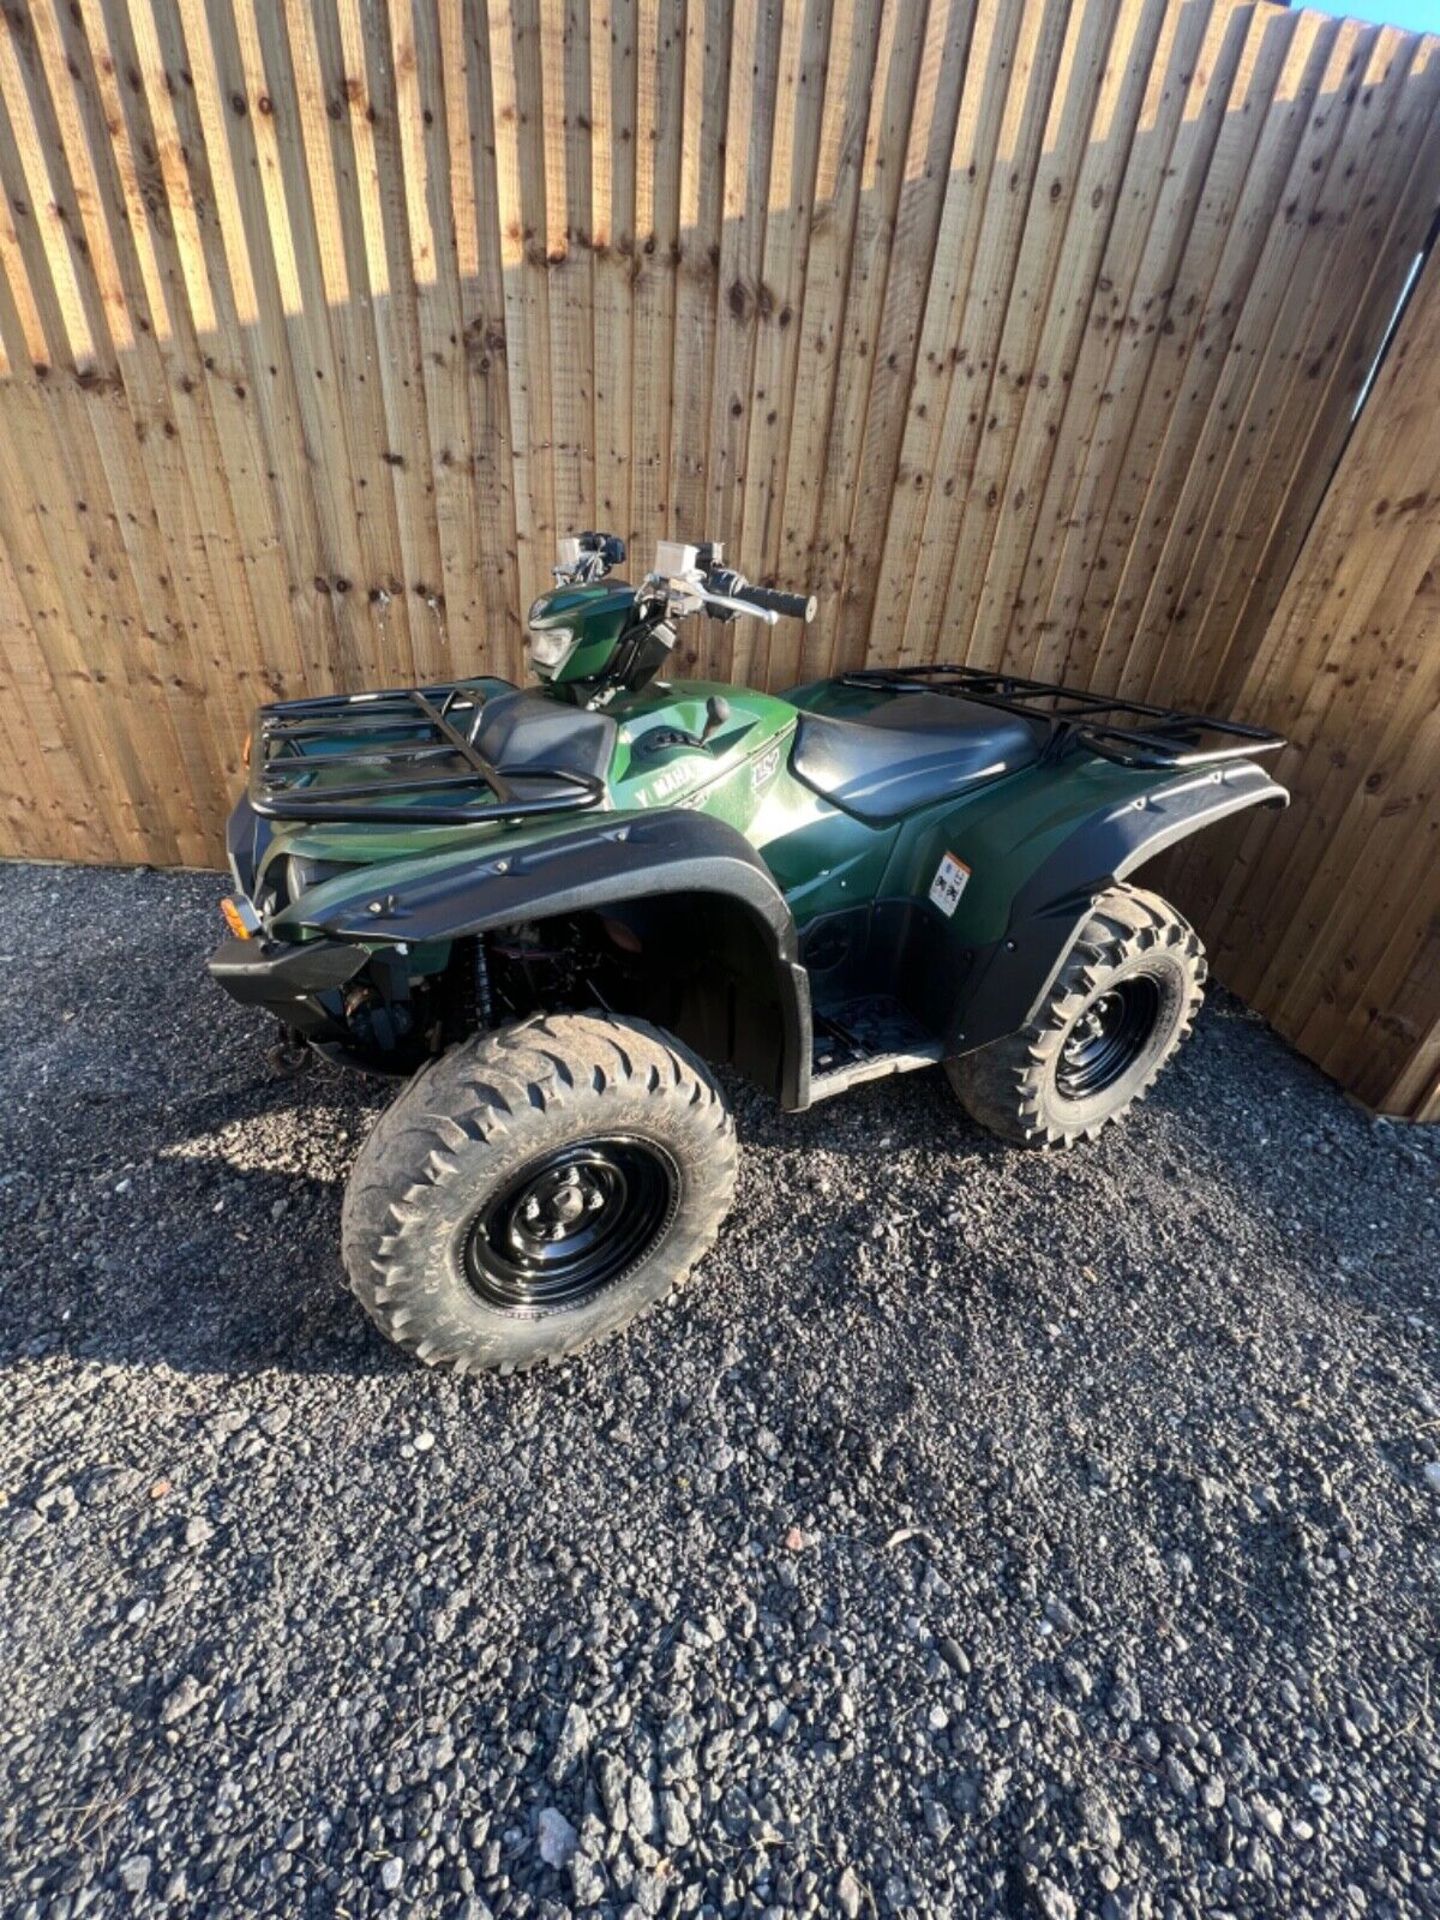 YAMAHA GRIZZLY 700 1300 HOURS FROM NEW 4X4 ROAD LEGAL FARM QUAD BIKE ATV - Image 11 of 13